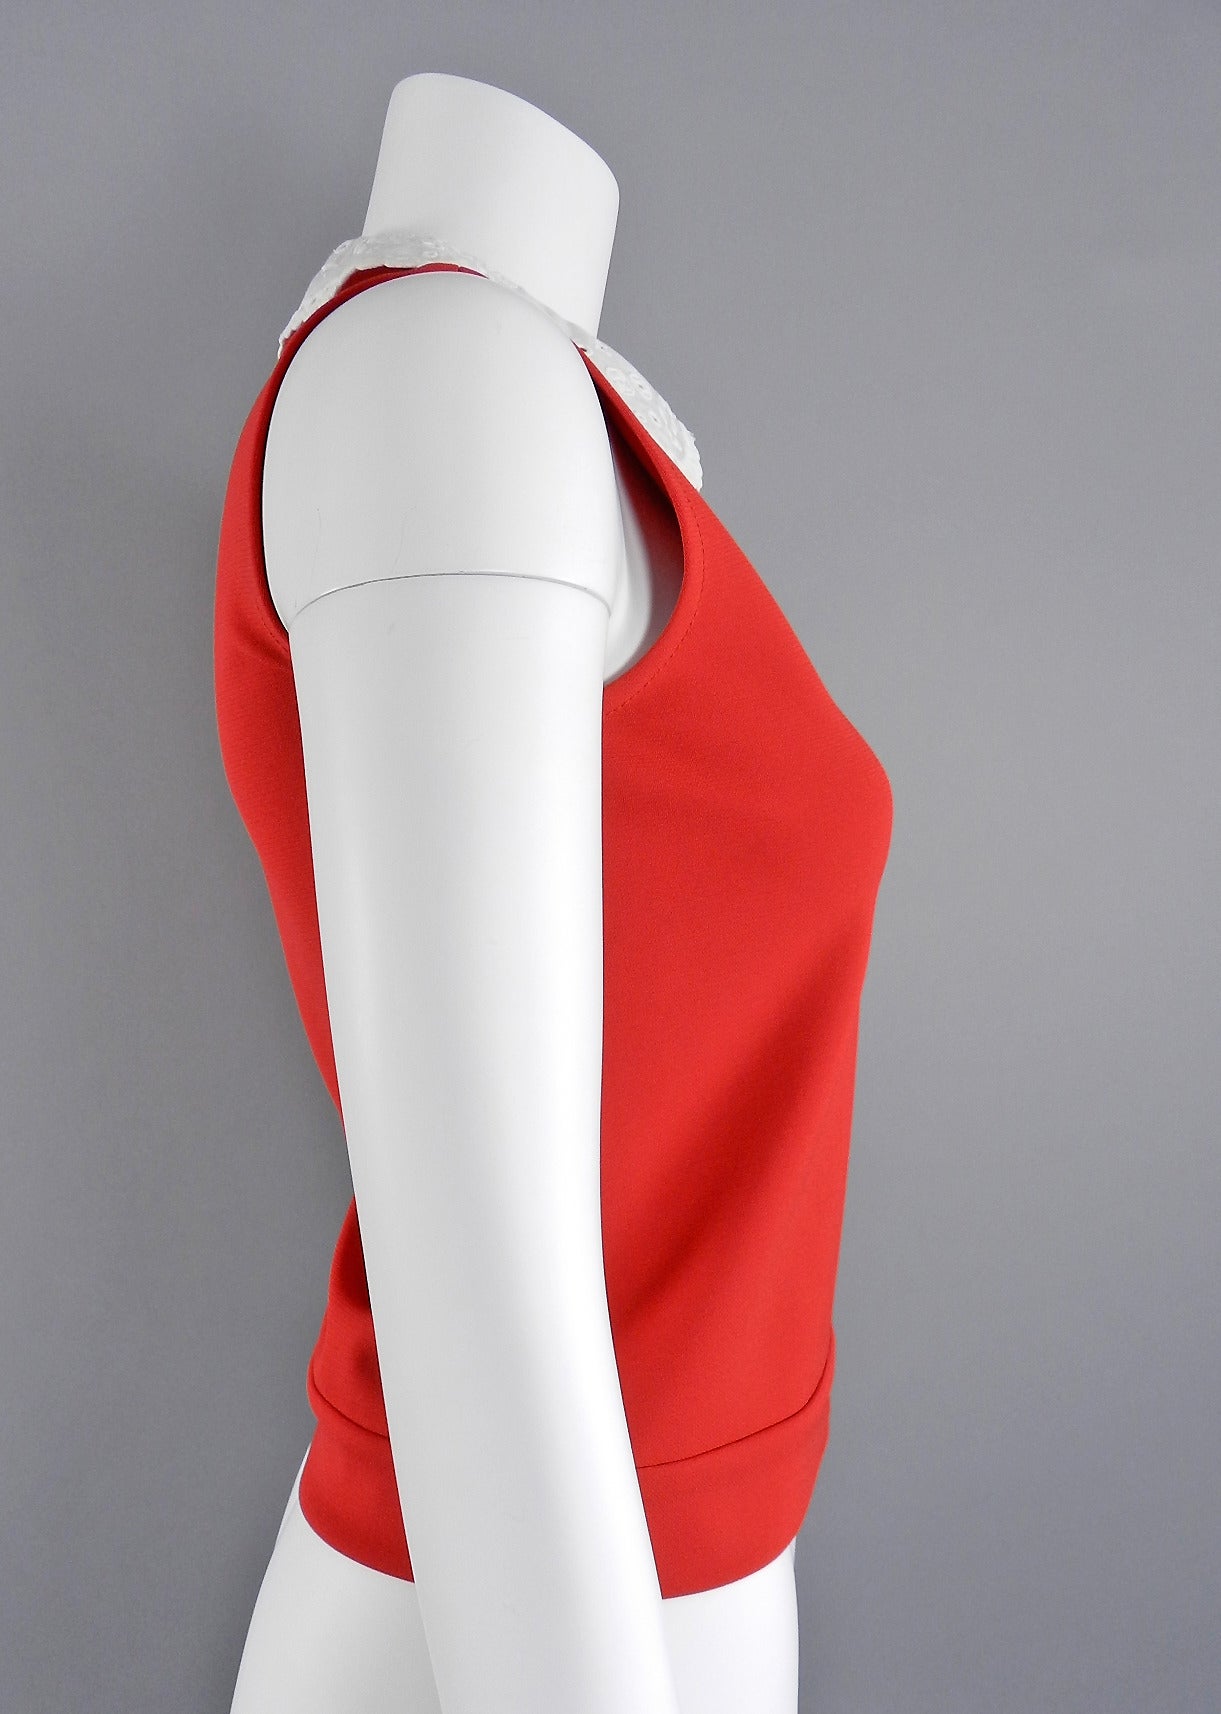 Louis Vuitton red zip up vest with removable white lace collar. Tagged size FR 34 (USA 0/2). To fit 32/33